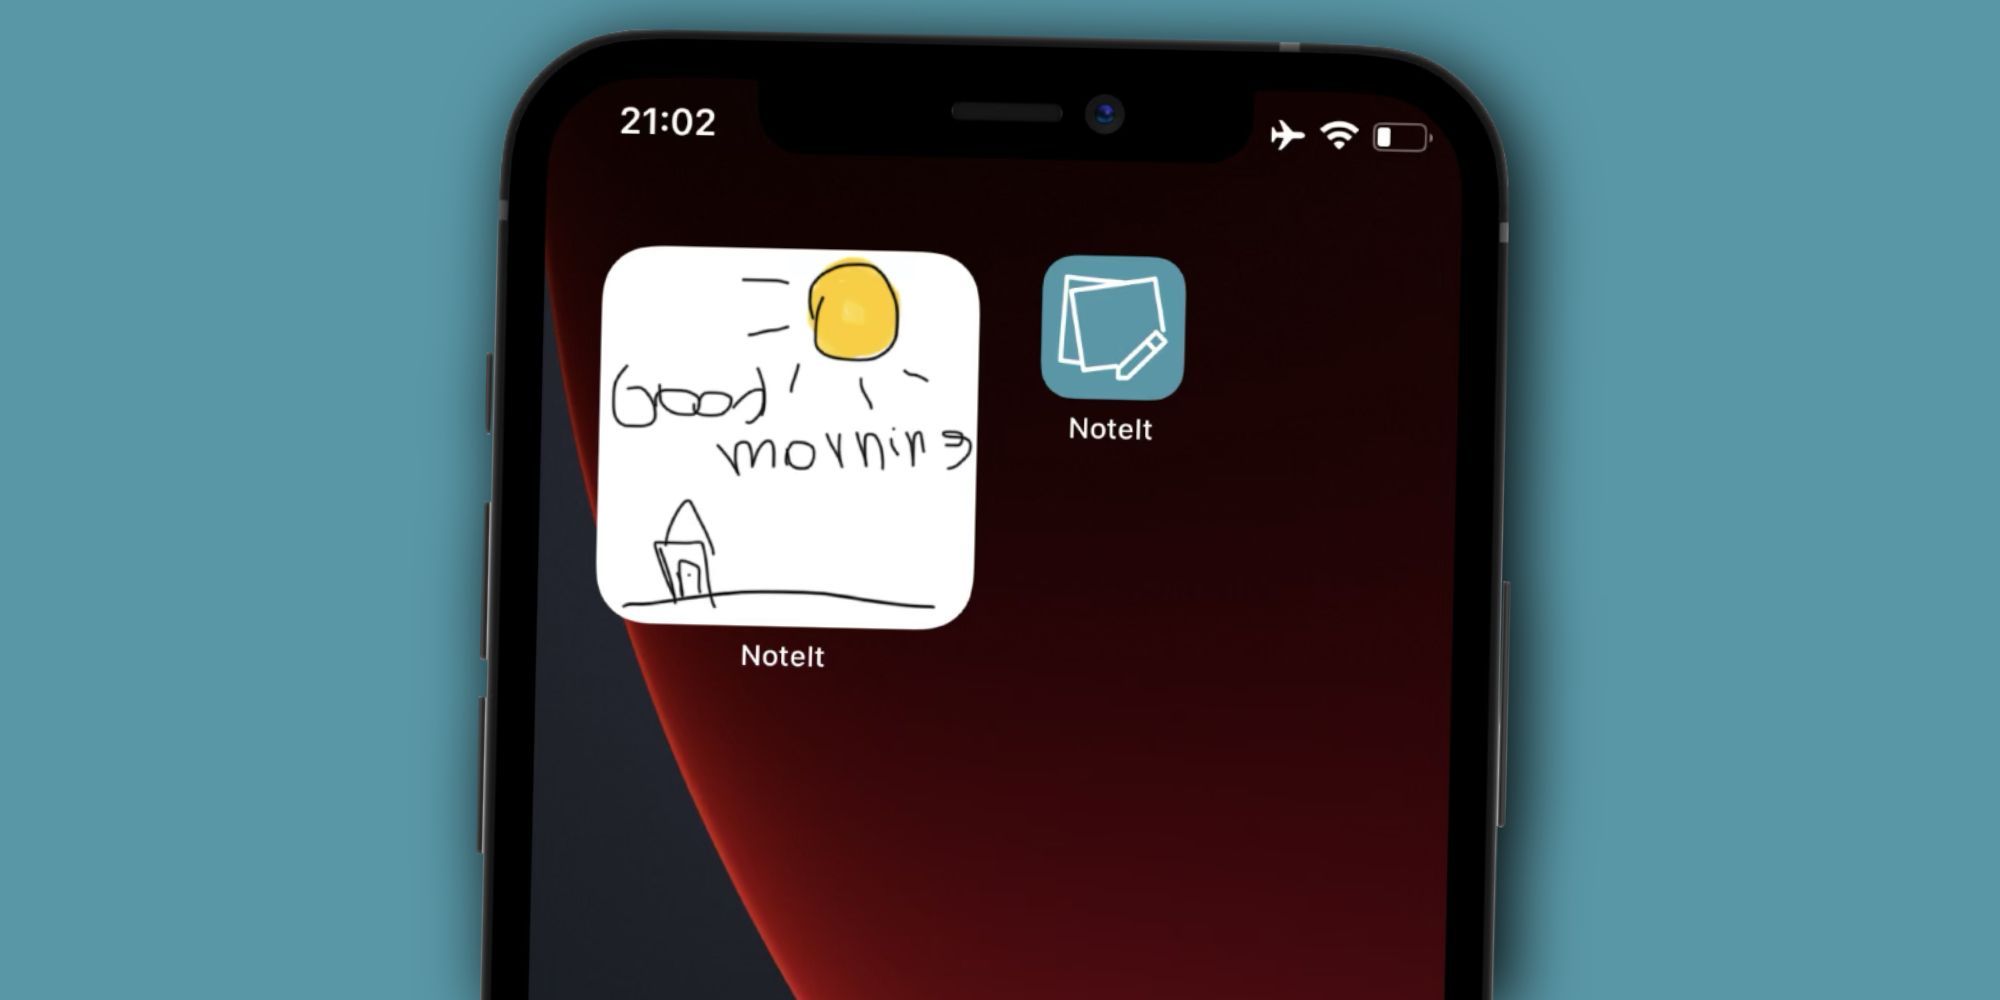 The NoteIt app and widget on an iPhone